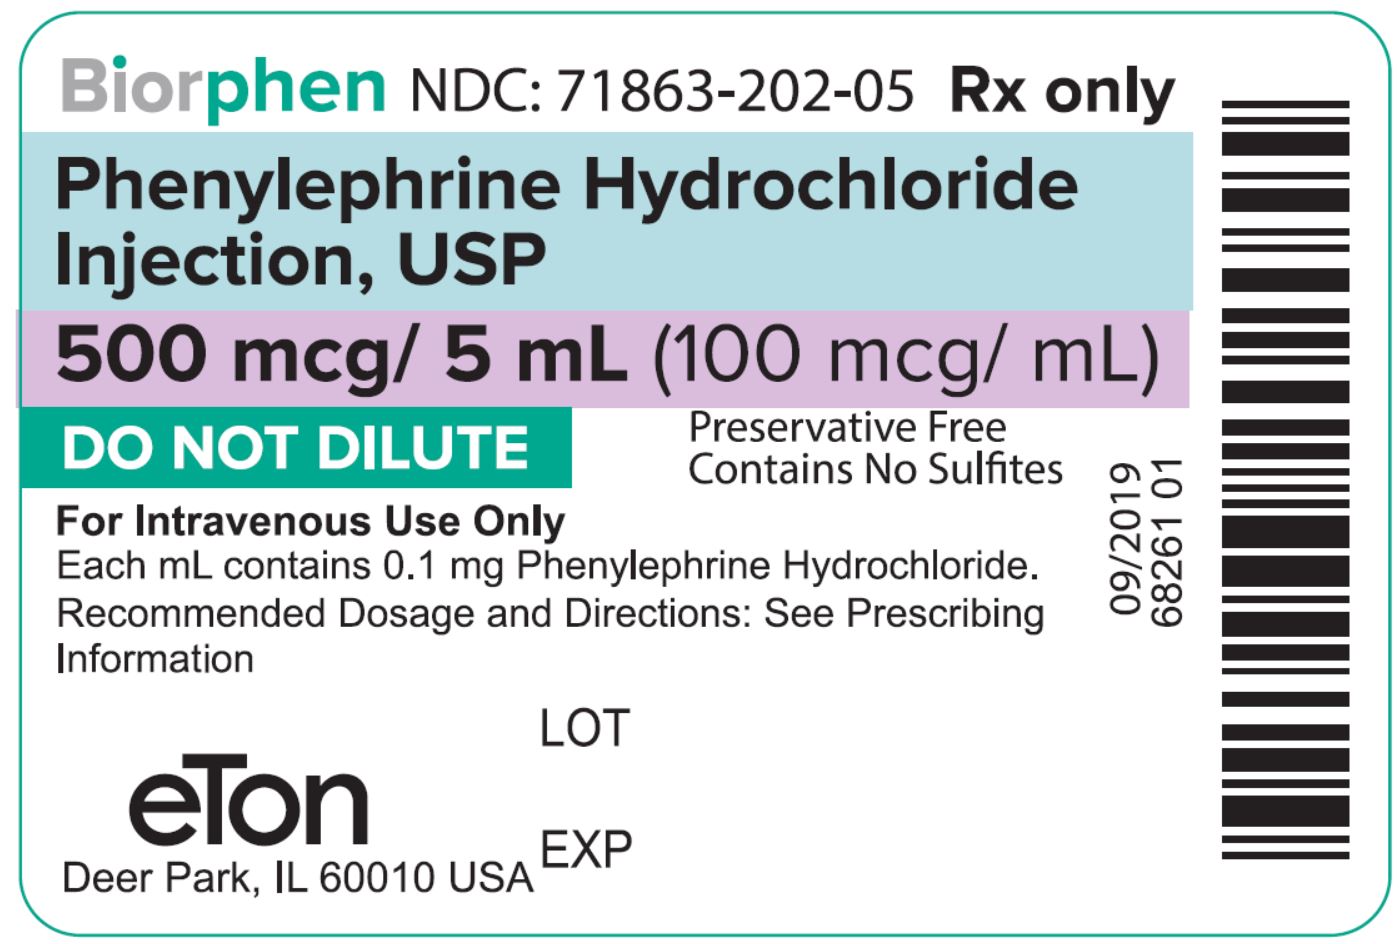 BIORPHEN (Phenylephrine Hydrochloride) Injection, USP 0.1 mg/ml Ampoule Label - NDC: <a href=/NDC/71863-202-05>71863-202-05</a>